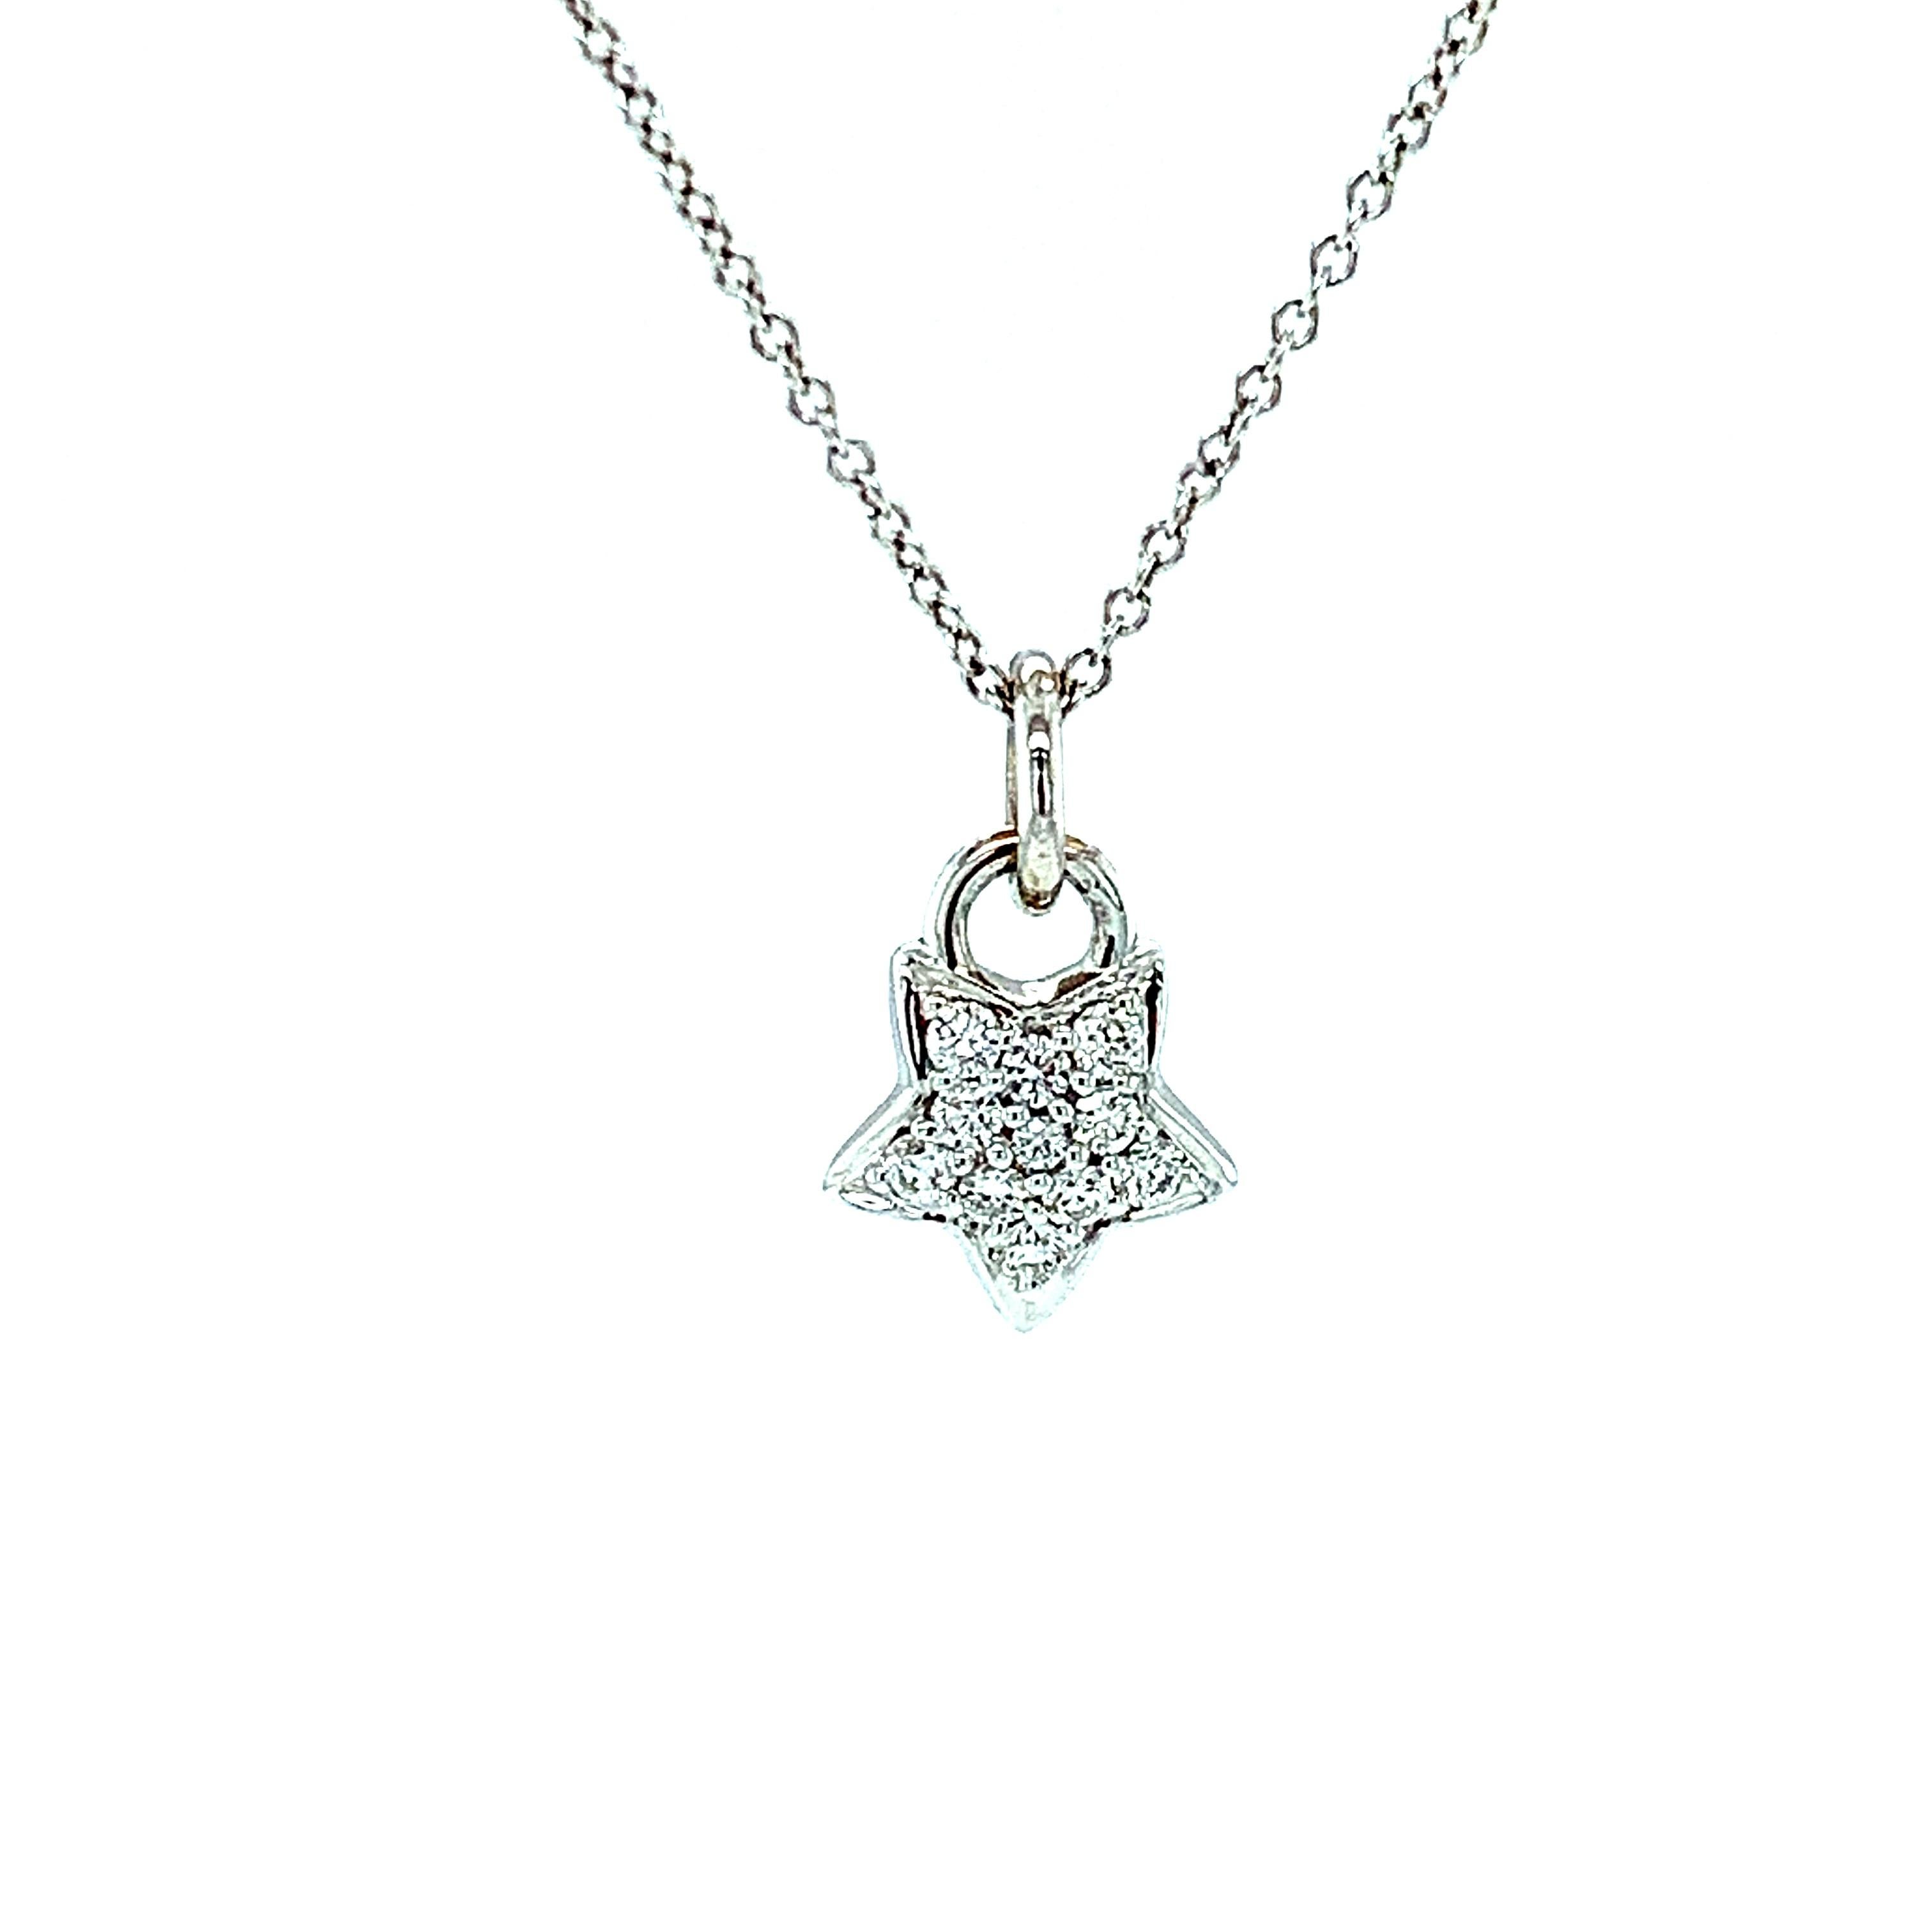 When you wish upon a star, makes no difference who you are...diamonds are forever and for everyone! This petite diamond-studded star pendant is simply stunning, with sparkling white diamonds have set in high-polished 18k white gold. With the star